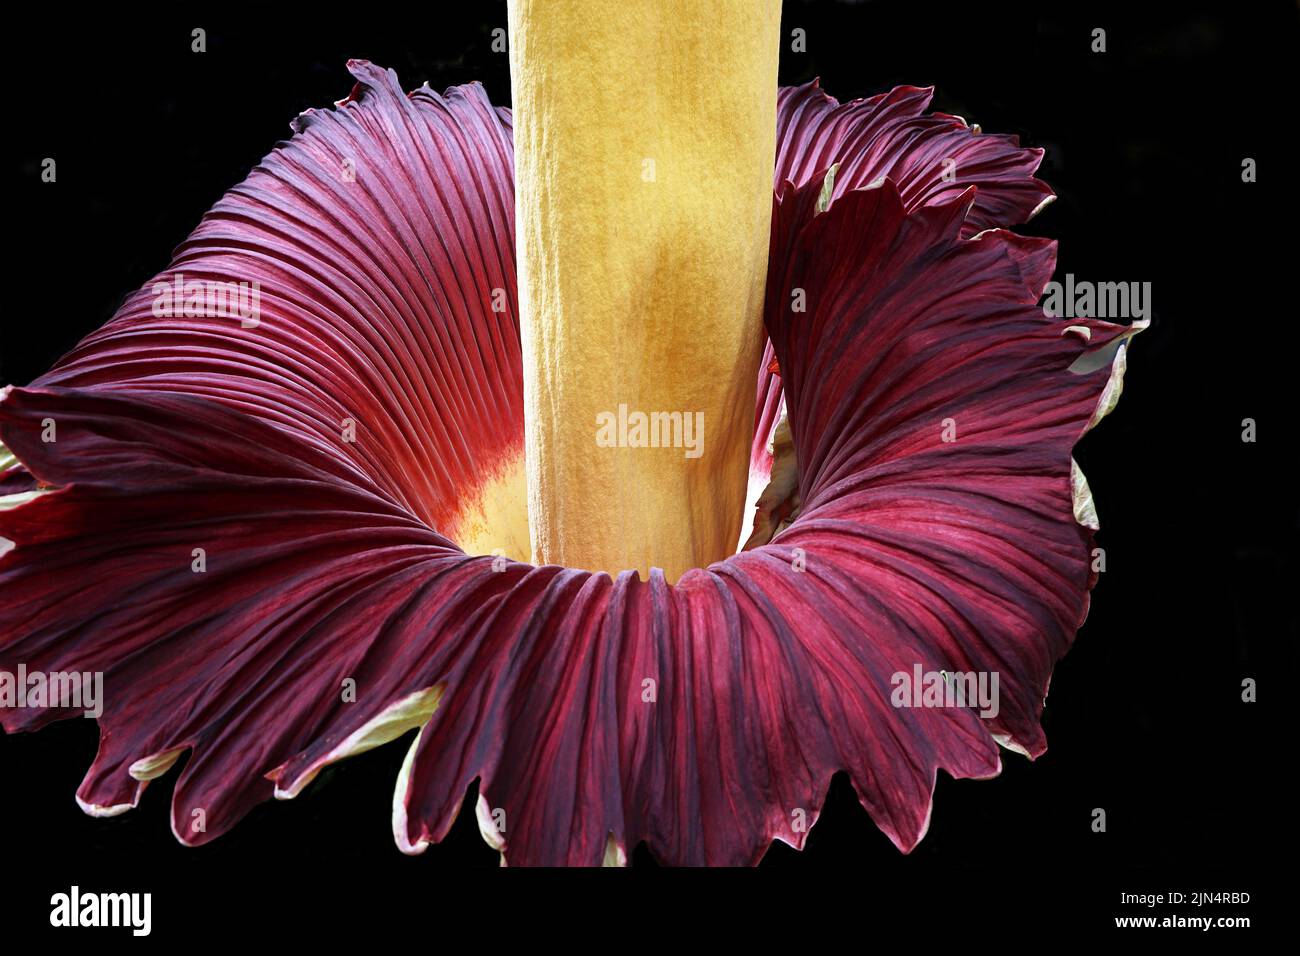 Amorphophallus titanum flowering.Giant arum.the inflorescence consists a fleshy spadix surrounded by a sheath-shaped bract or spatha.It can grow up to three meters.When opens,it spreads a scent of carrion.It occurs in the rainforests of Western Sumatra in semi-shaded areas. Stock Photo